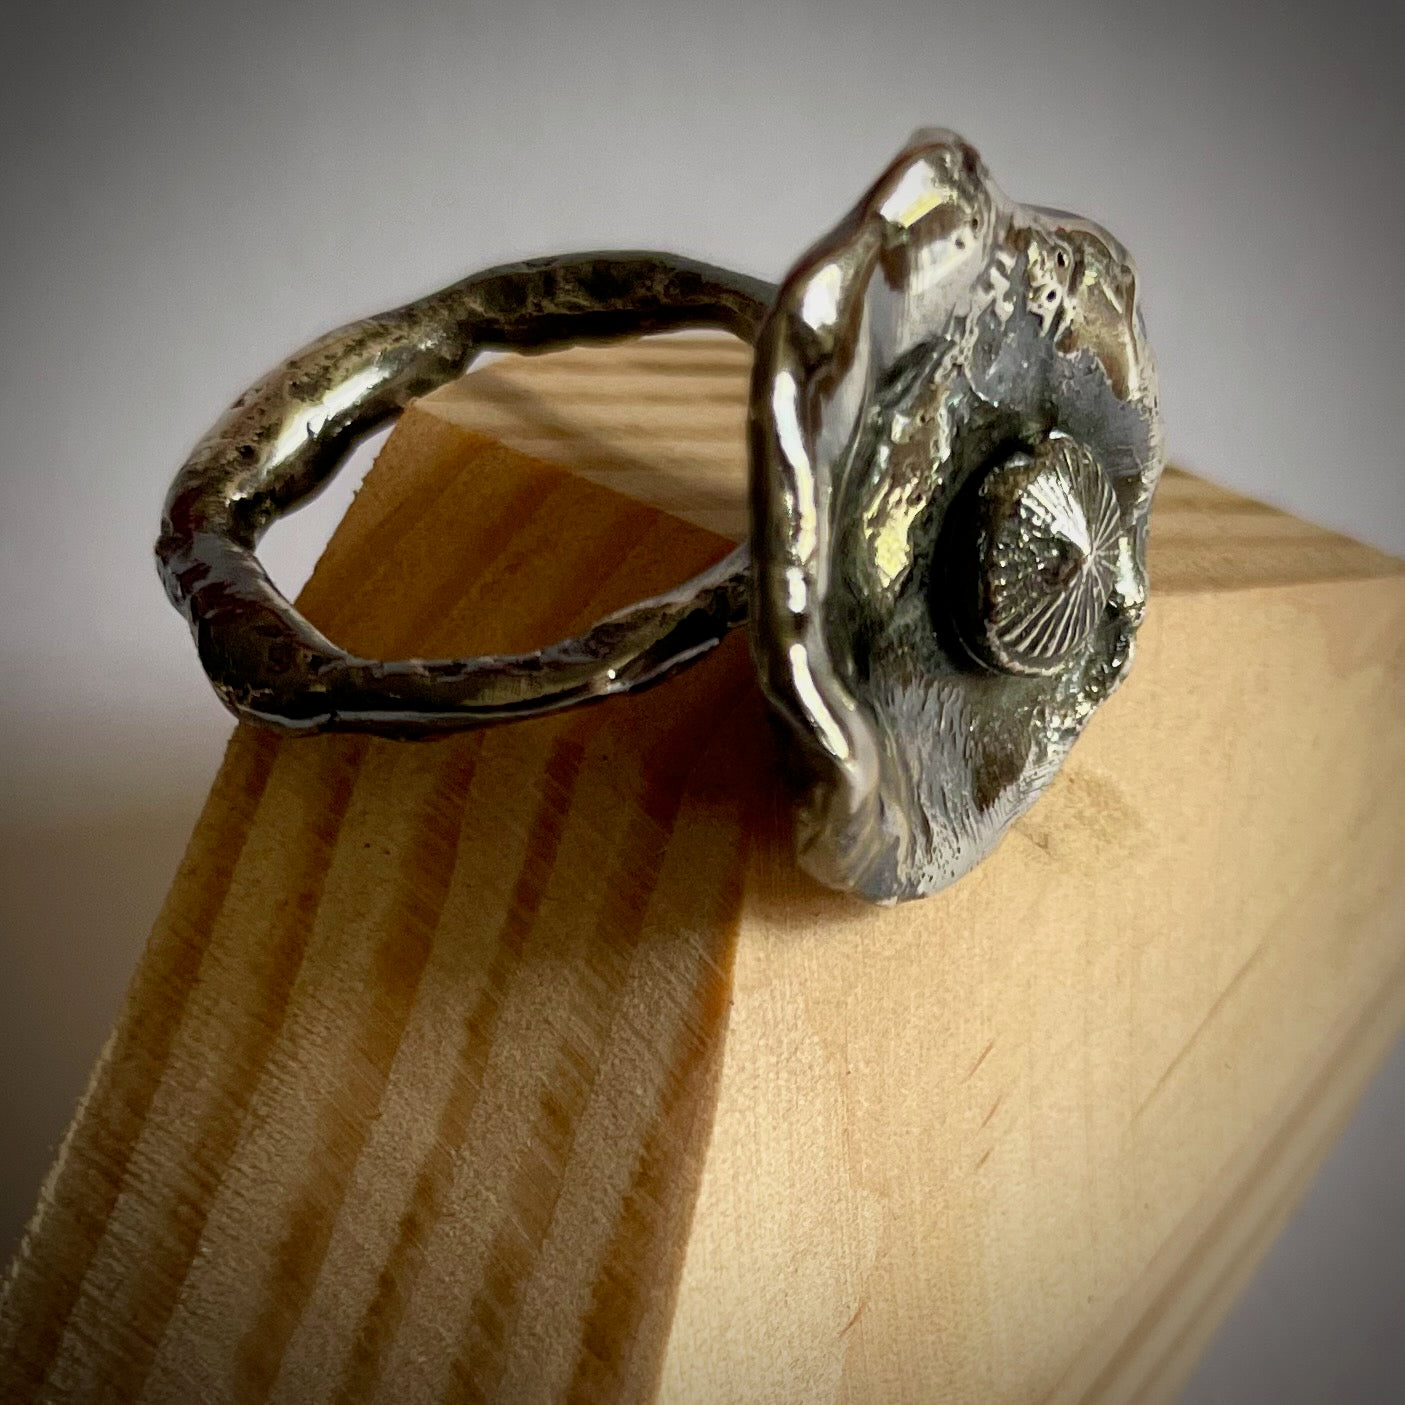 Oxidised Stirling silver hand cast ring by Pam de Groot